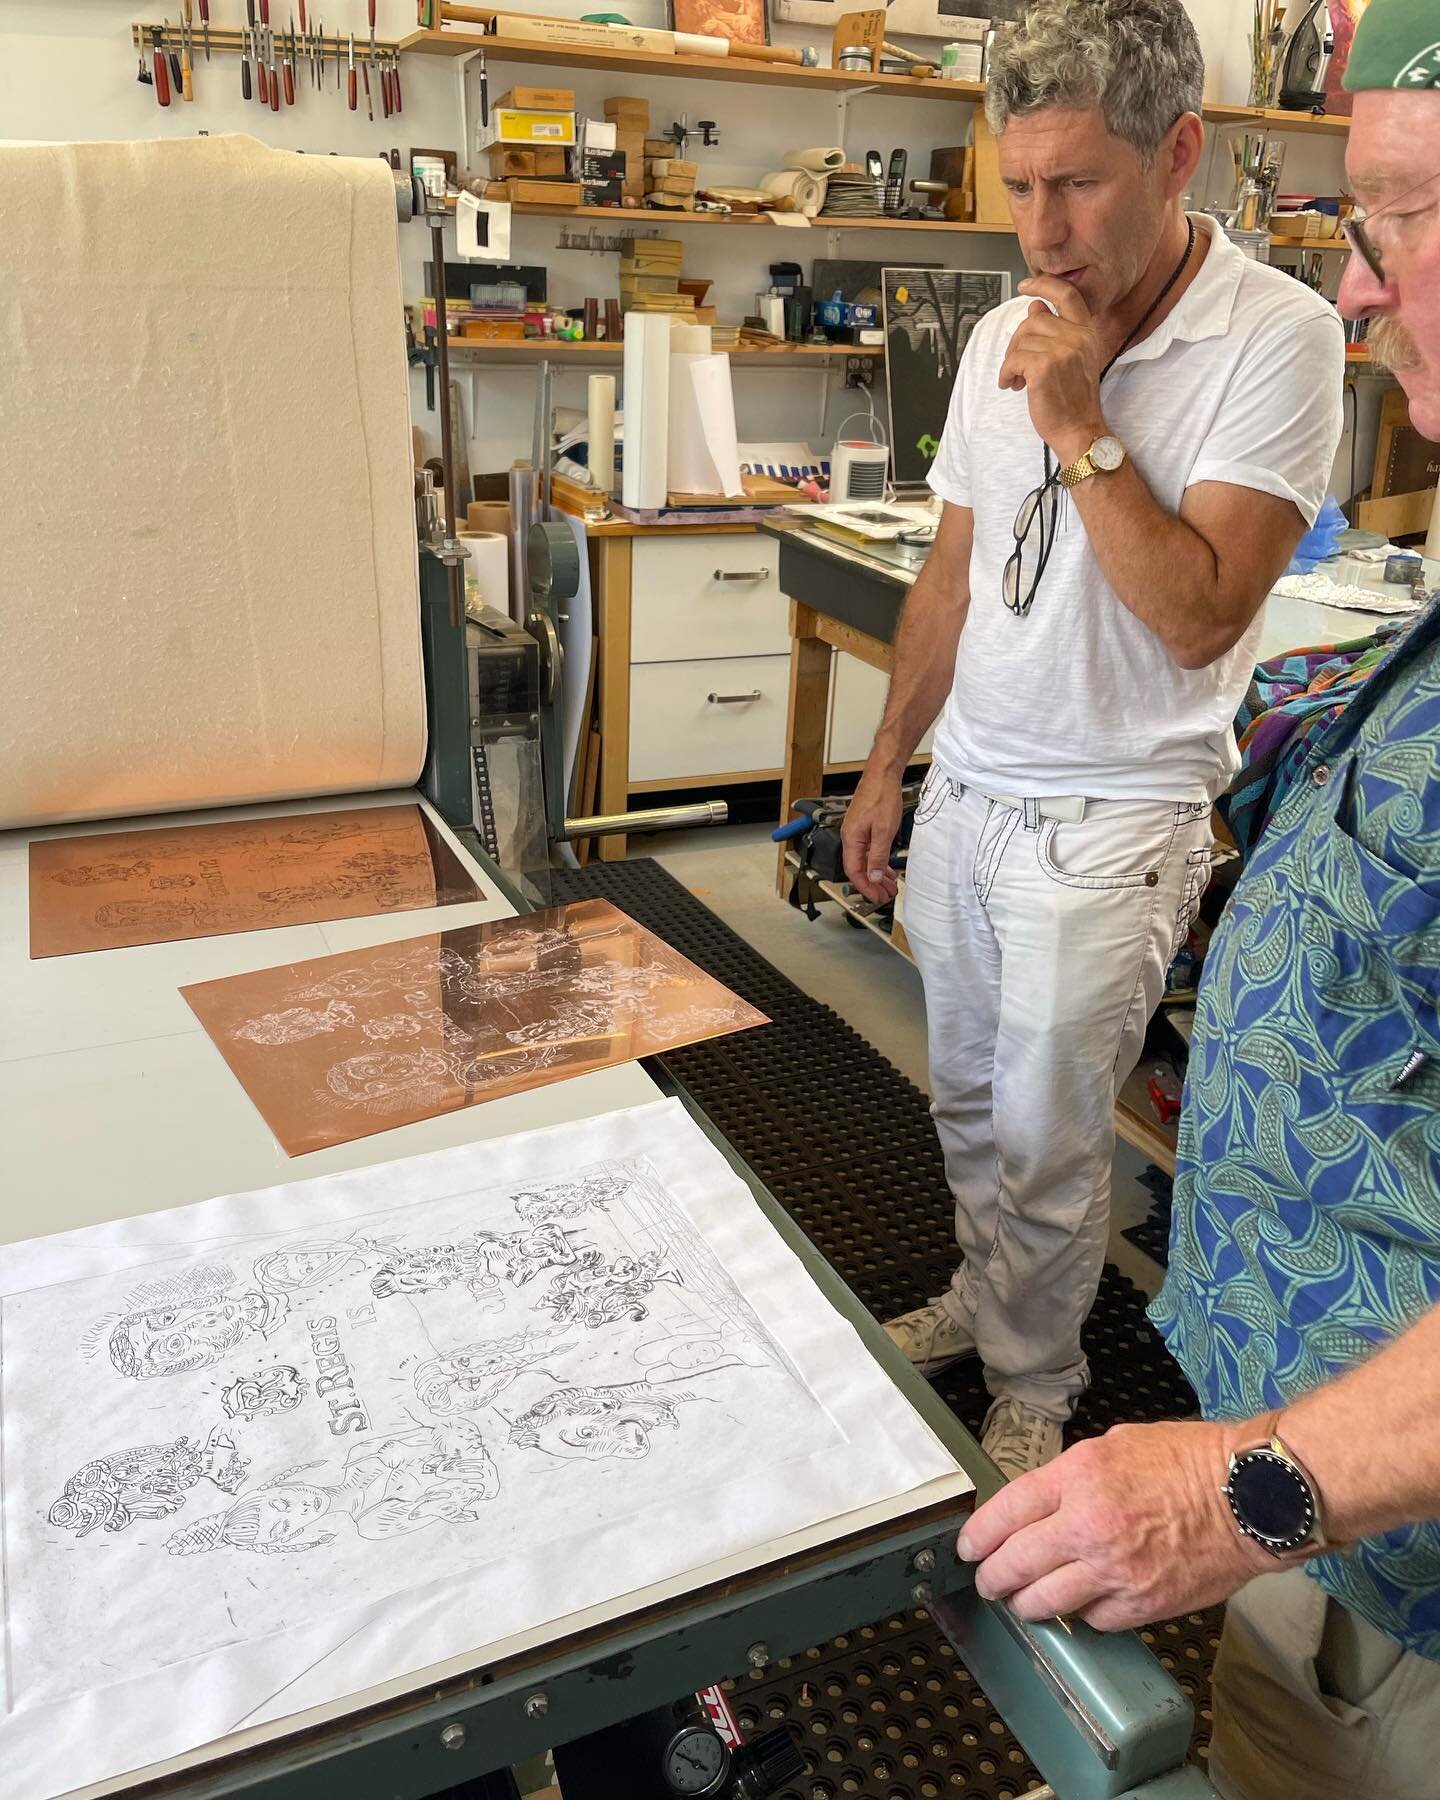 Graham Gillmore at New Leaf Editions working with master printer Peter Braune on his print for the Portfolio Prize 2021 edition
#grahamgillmore #newleafeditions#portfolioprize